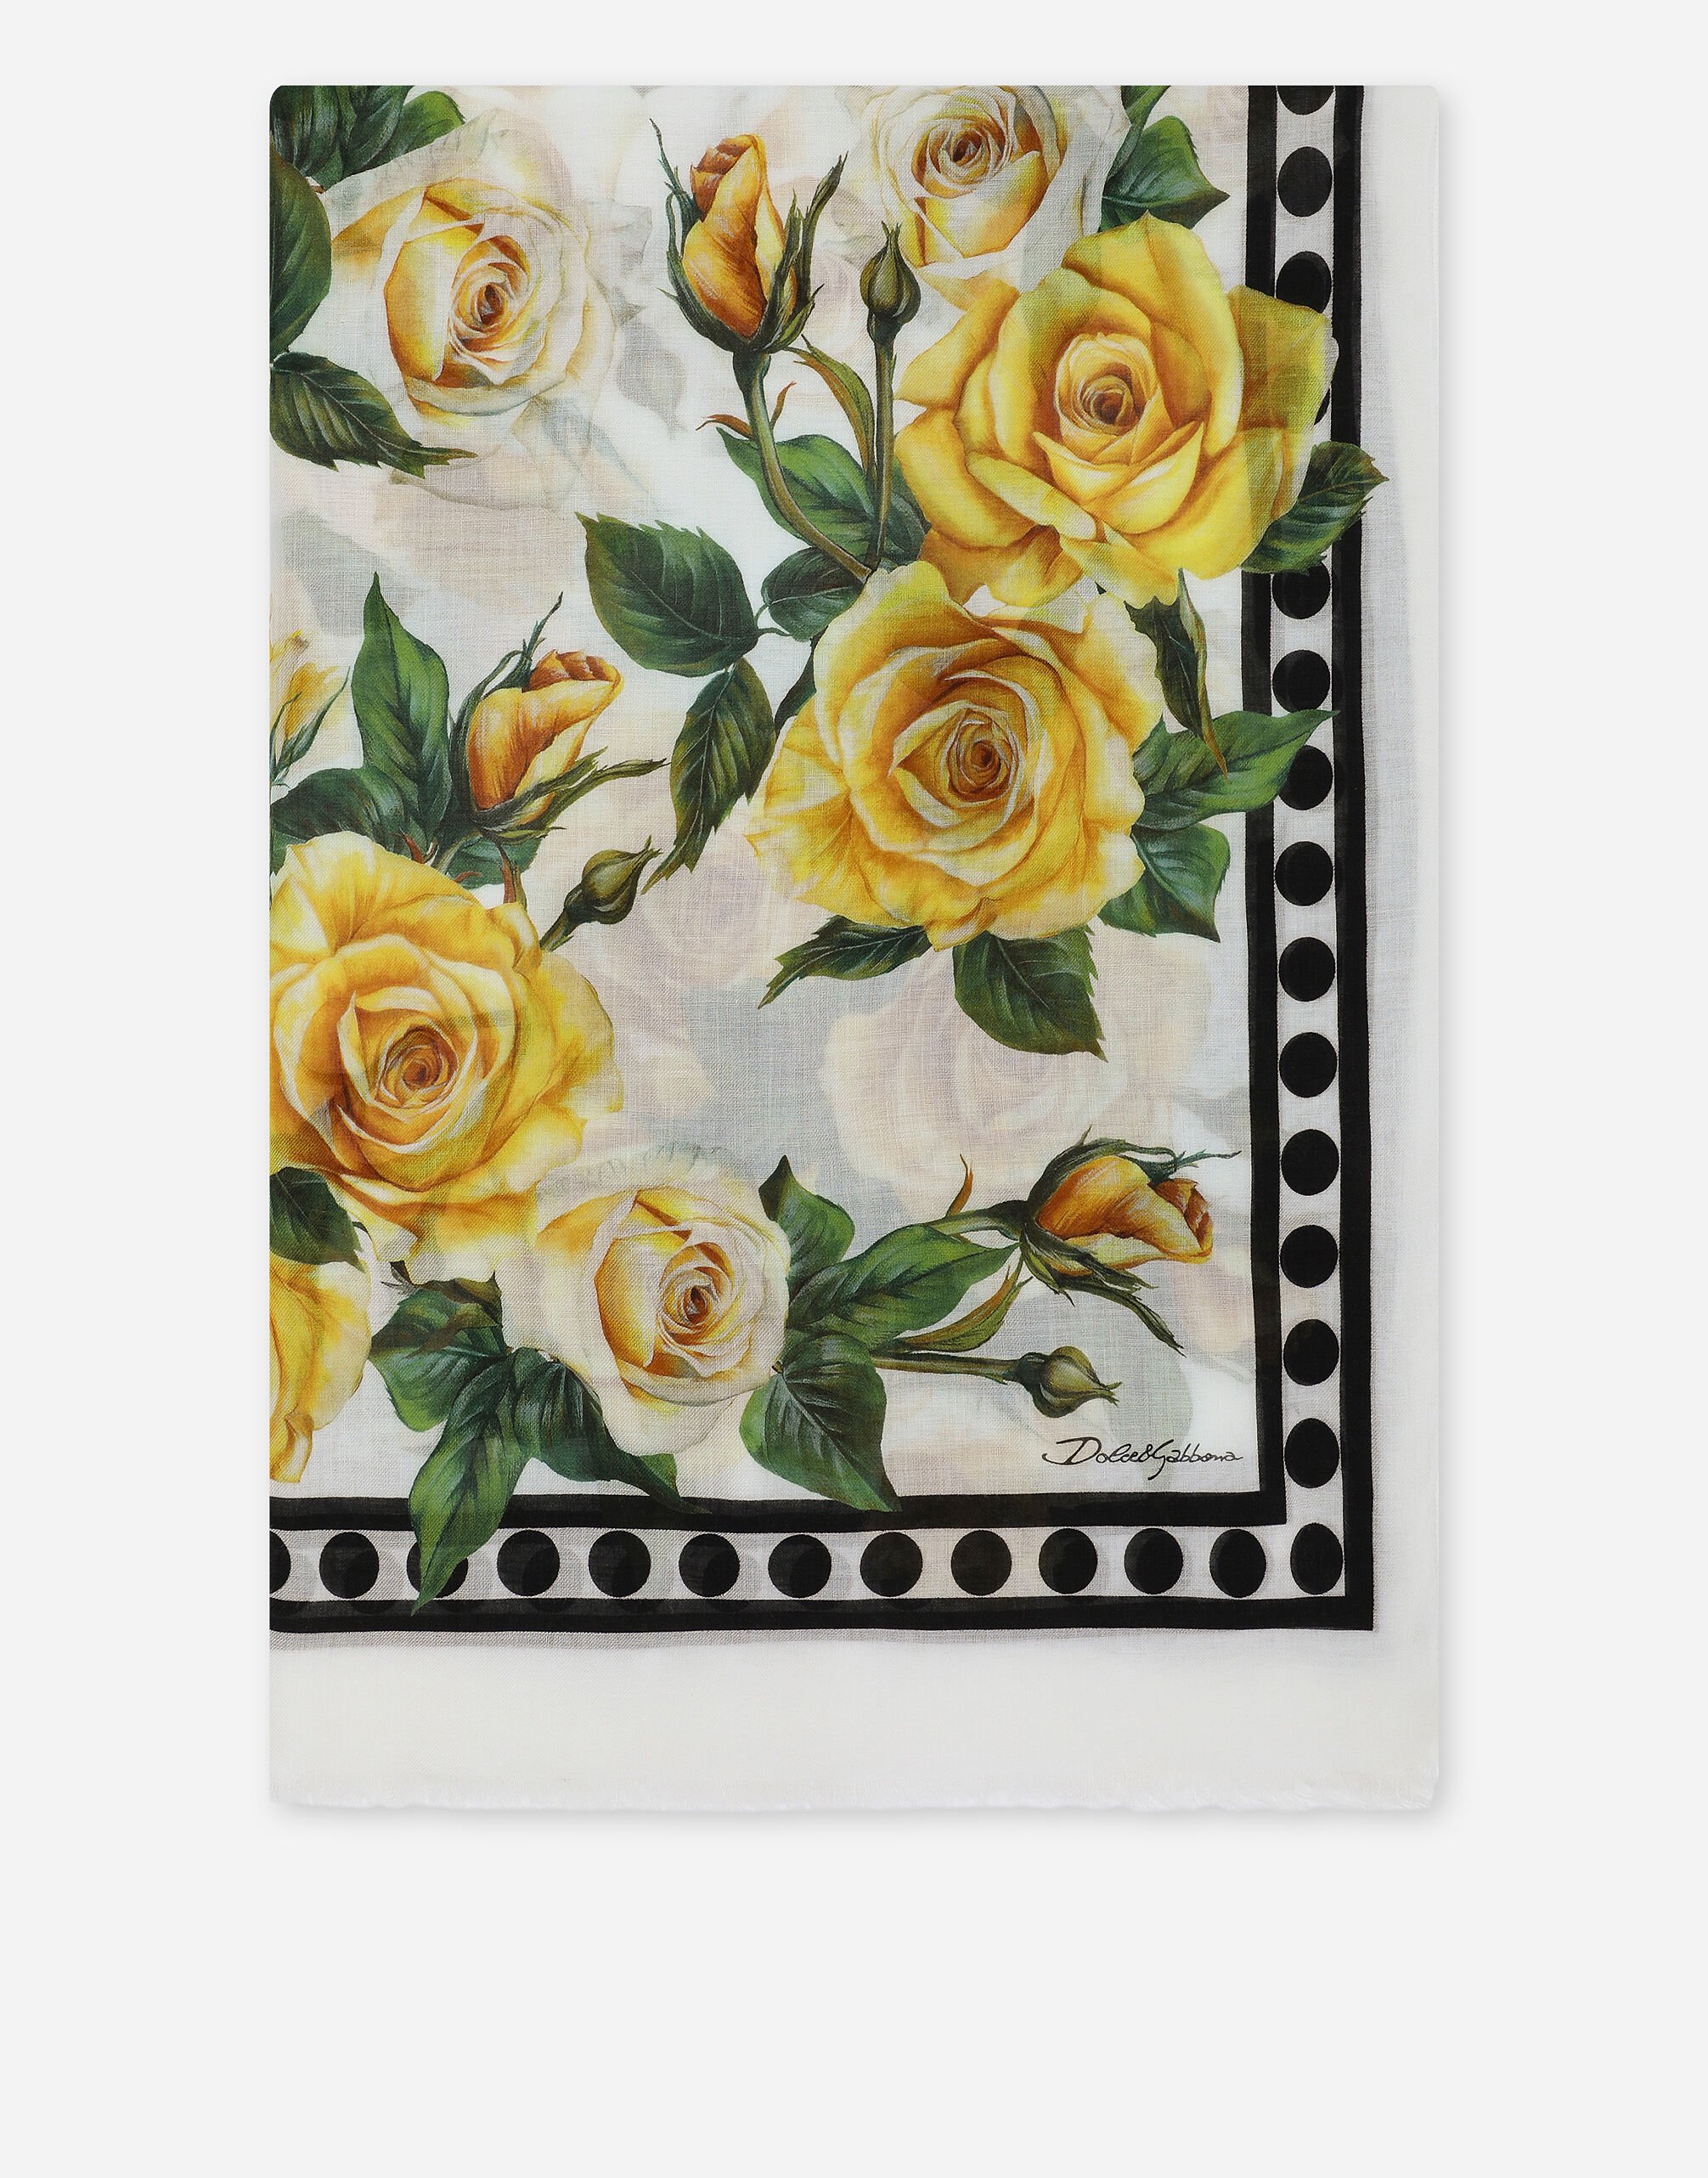 Dolce & Gabbana Modal and cashmere scarf with yellow rose print Print FN093RGDCLA